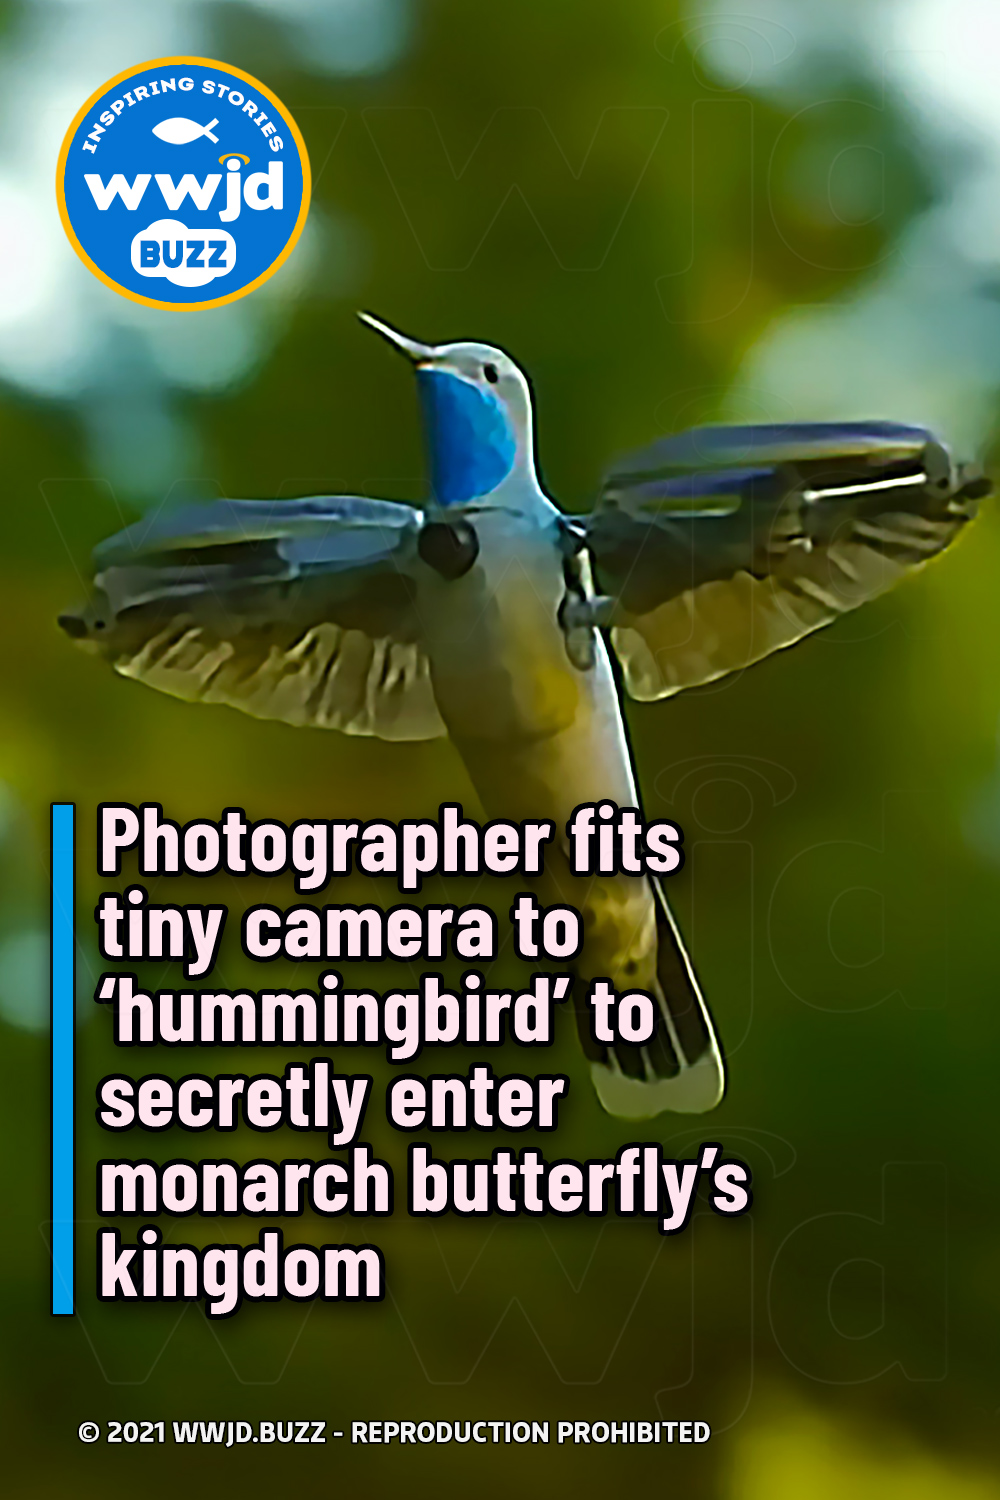 Photographer fits tiny camera to ‘hummingbird’ to secretly enter monarch butterfly’s kingdom